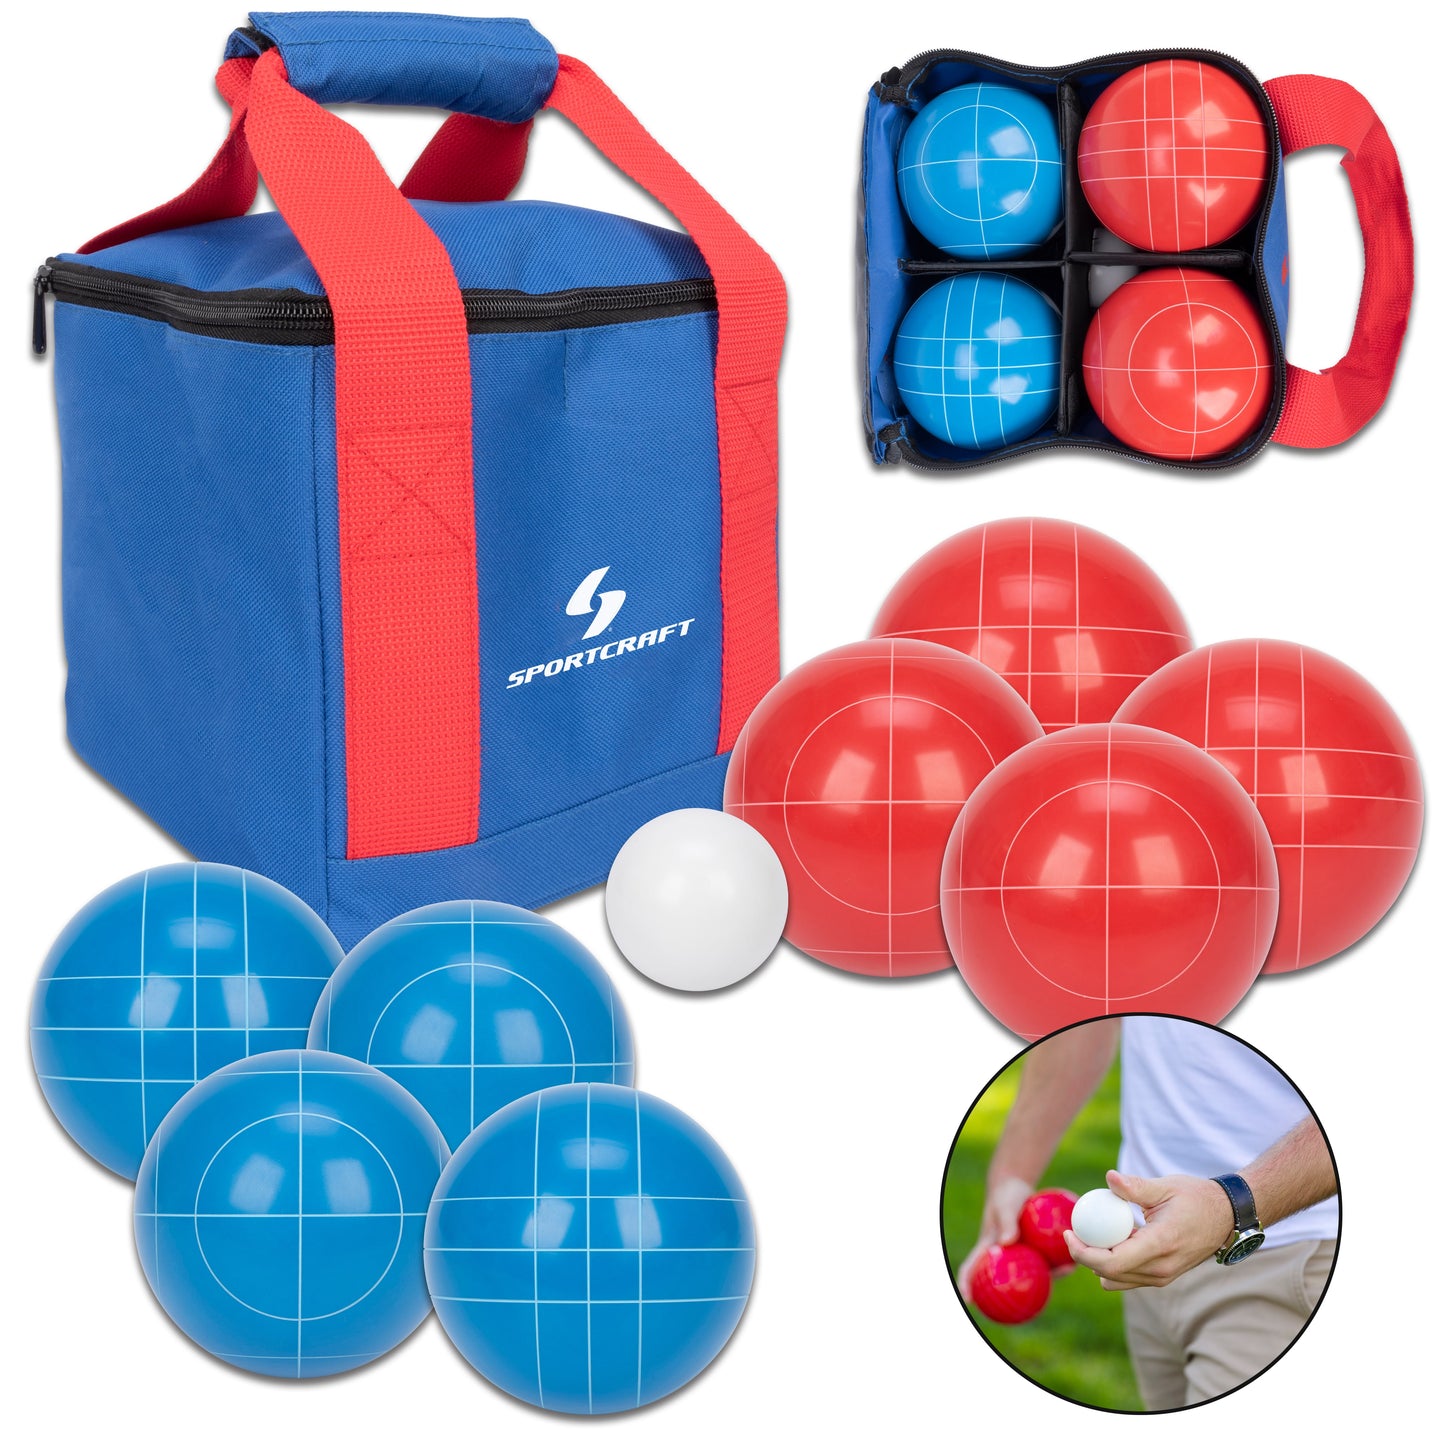 Sportcraft Bocce Ball Set product image showing complete set